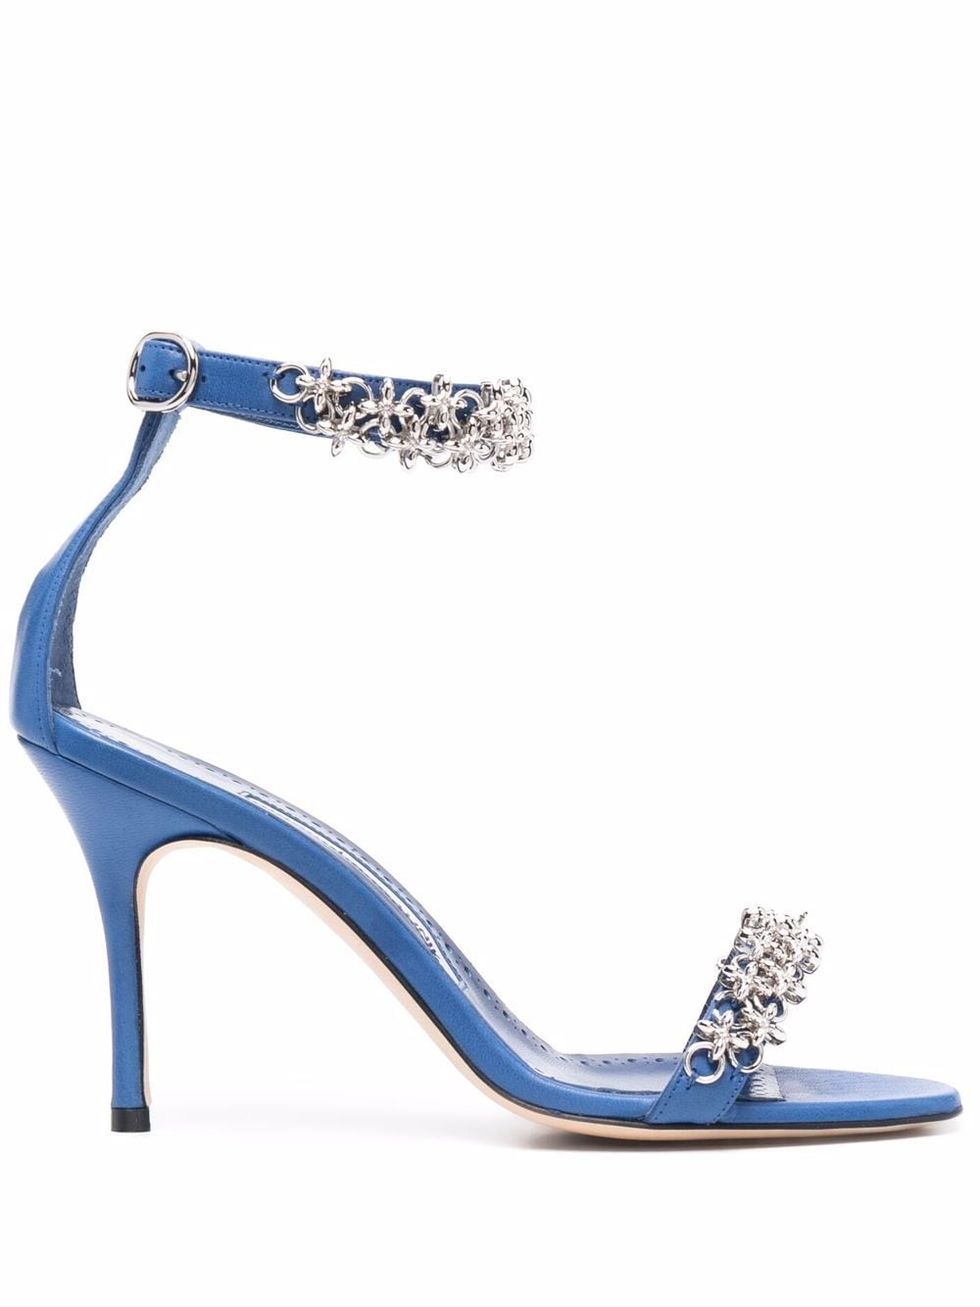 35 Blue Wedding Shoes - The Best Blue Shoes For Your Wedding